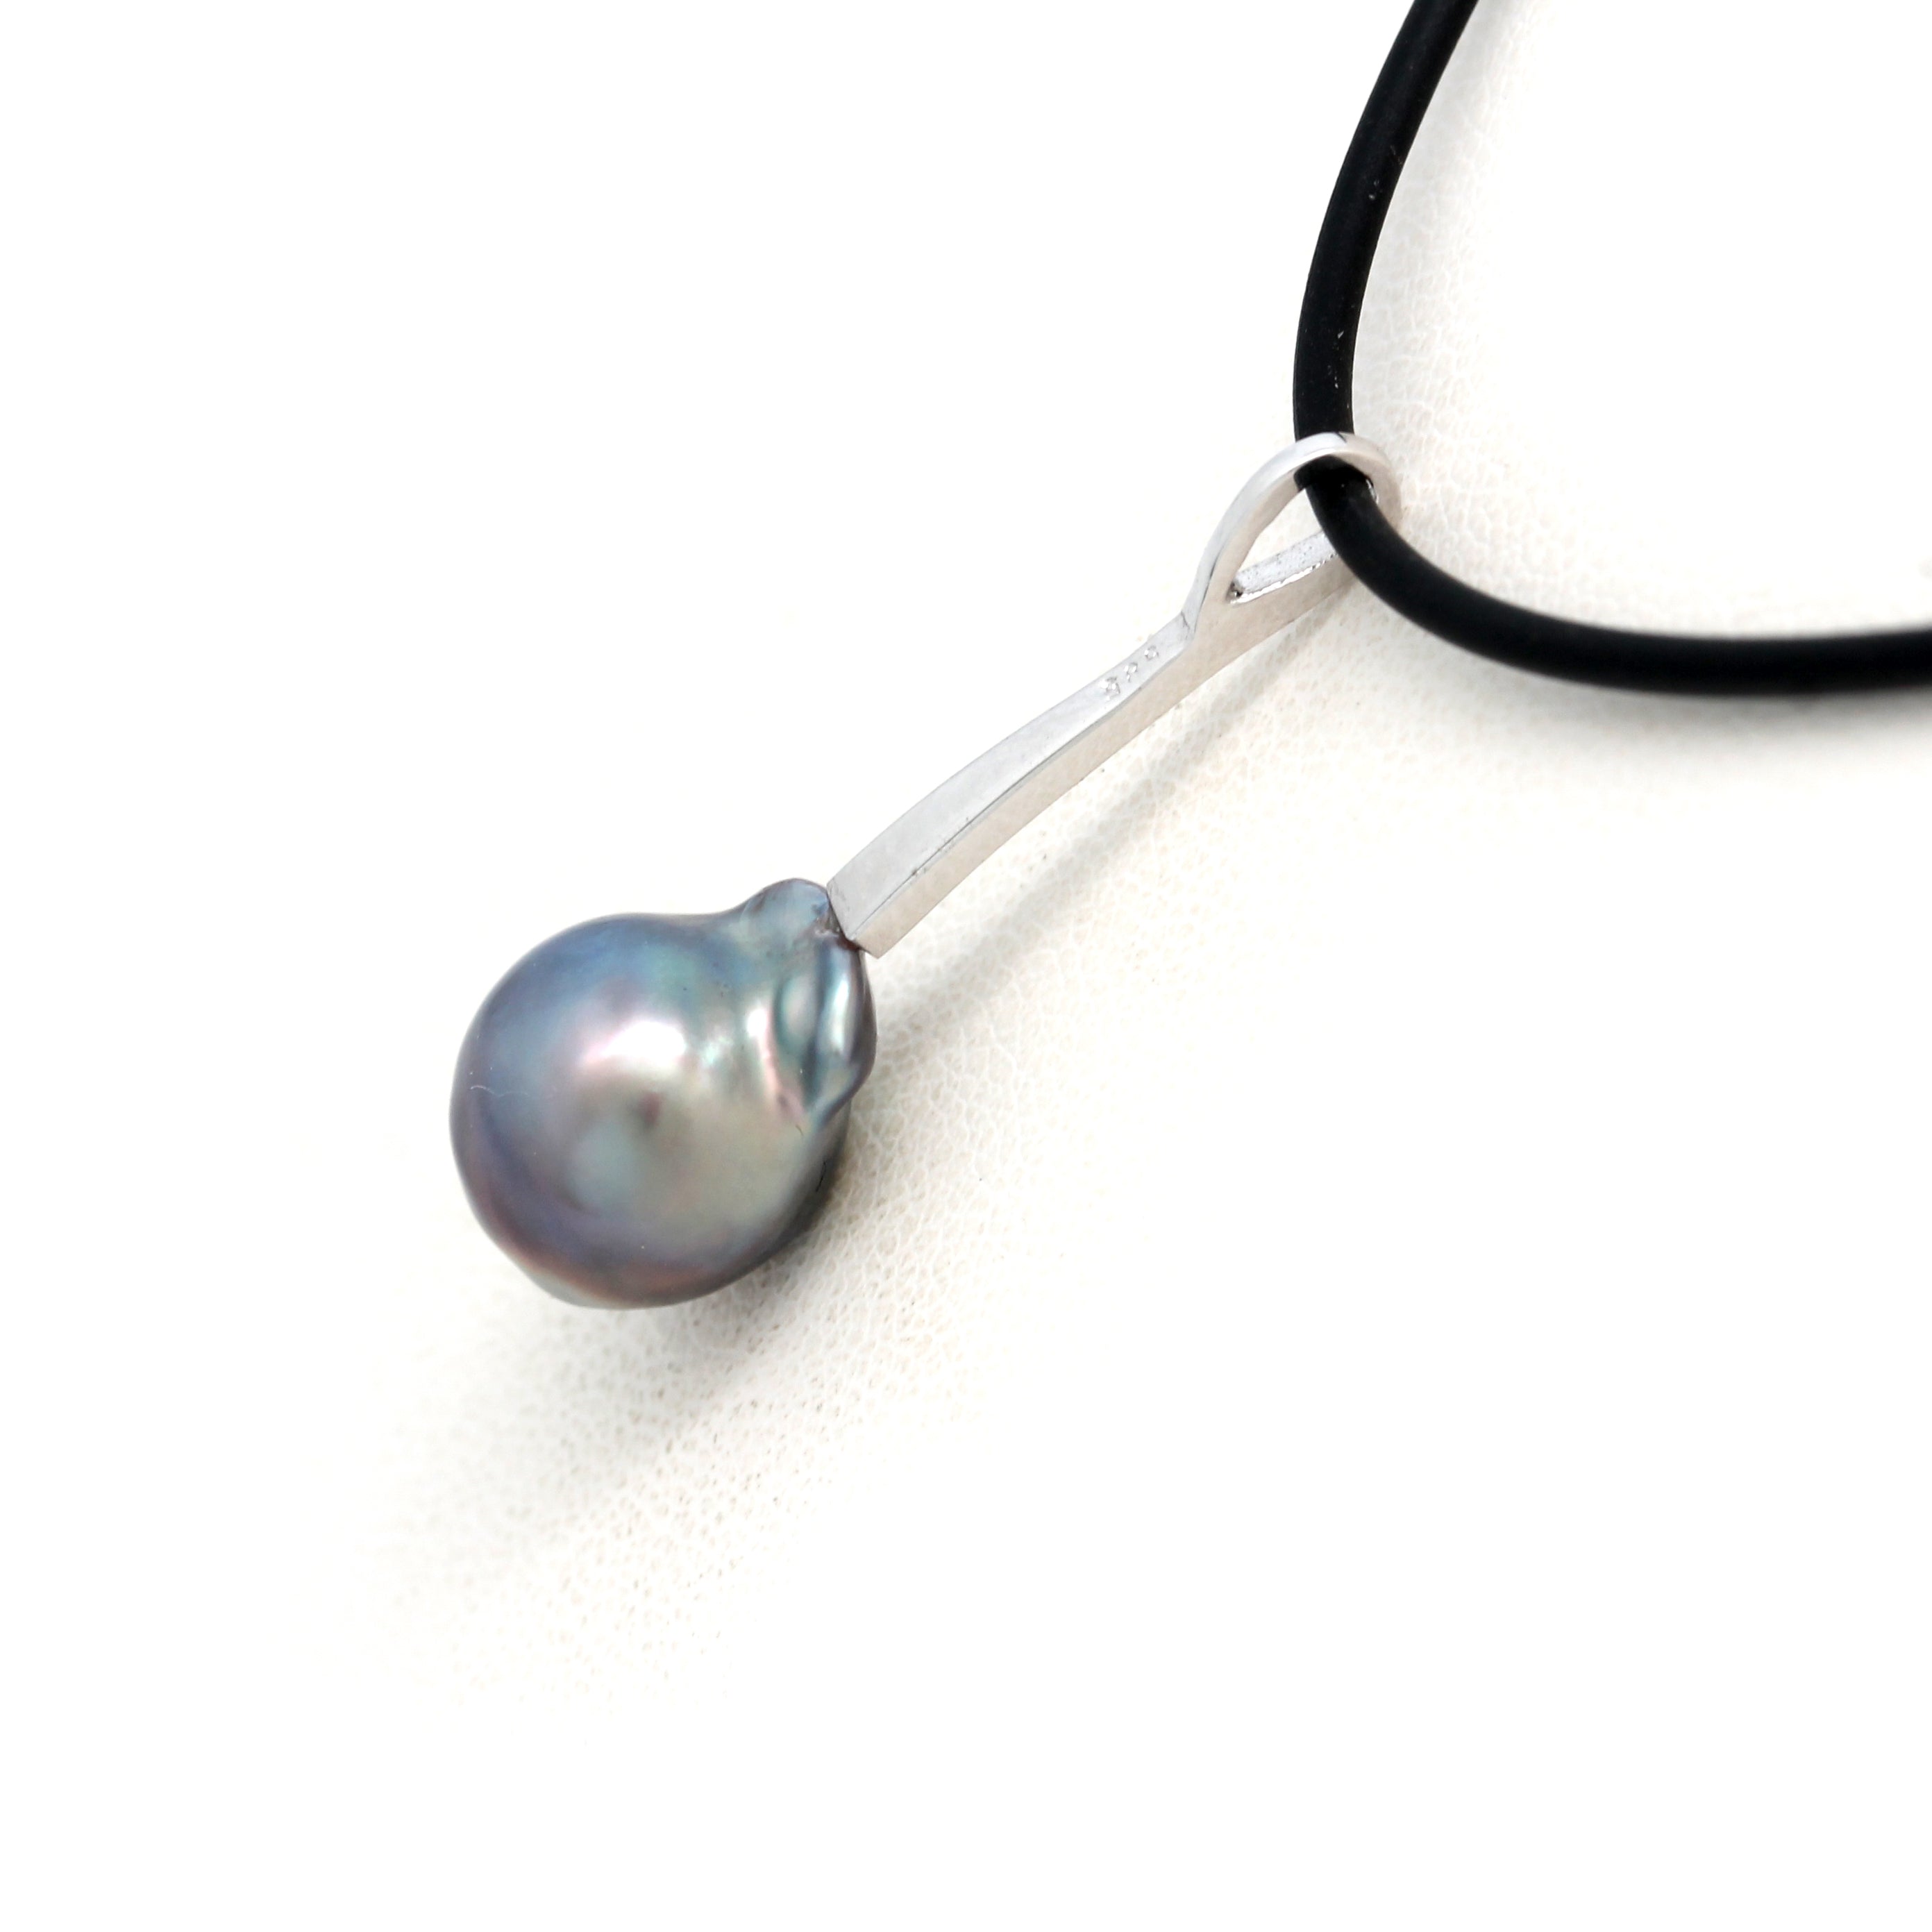 "Longhi" 14K White Gold Pendant with Cortez Pearl